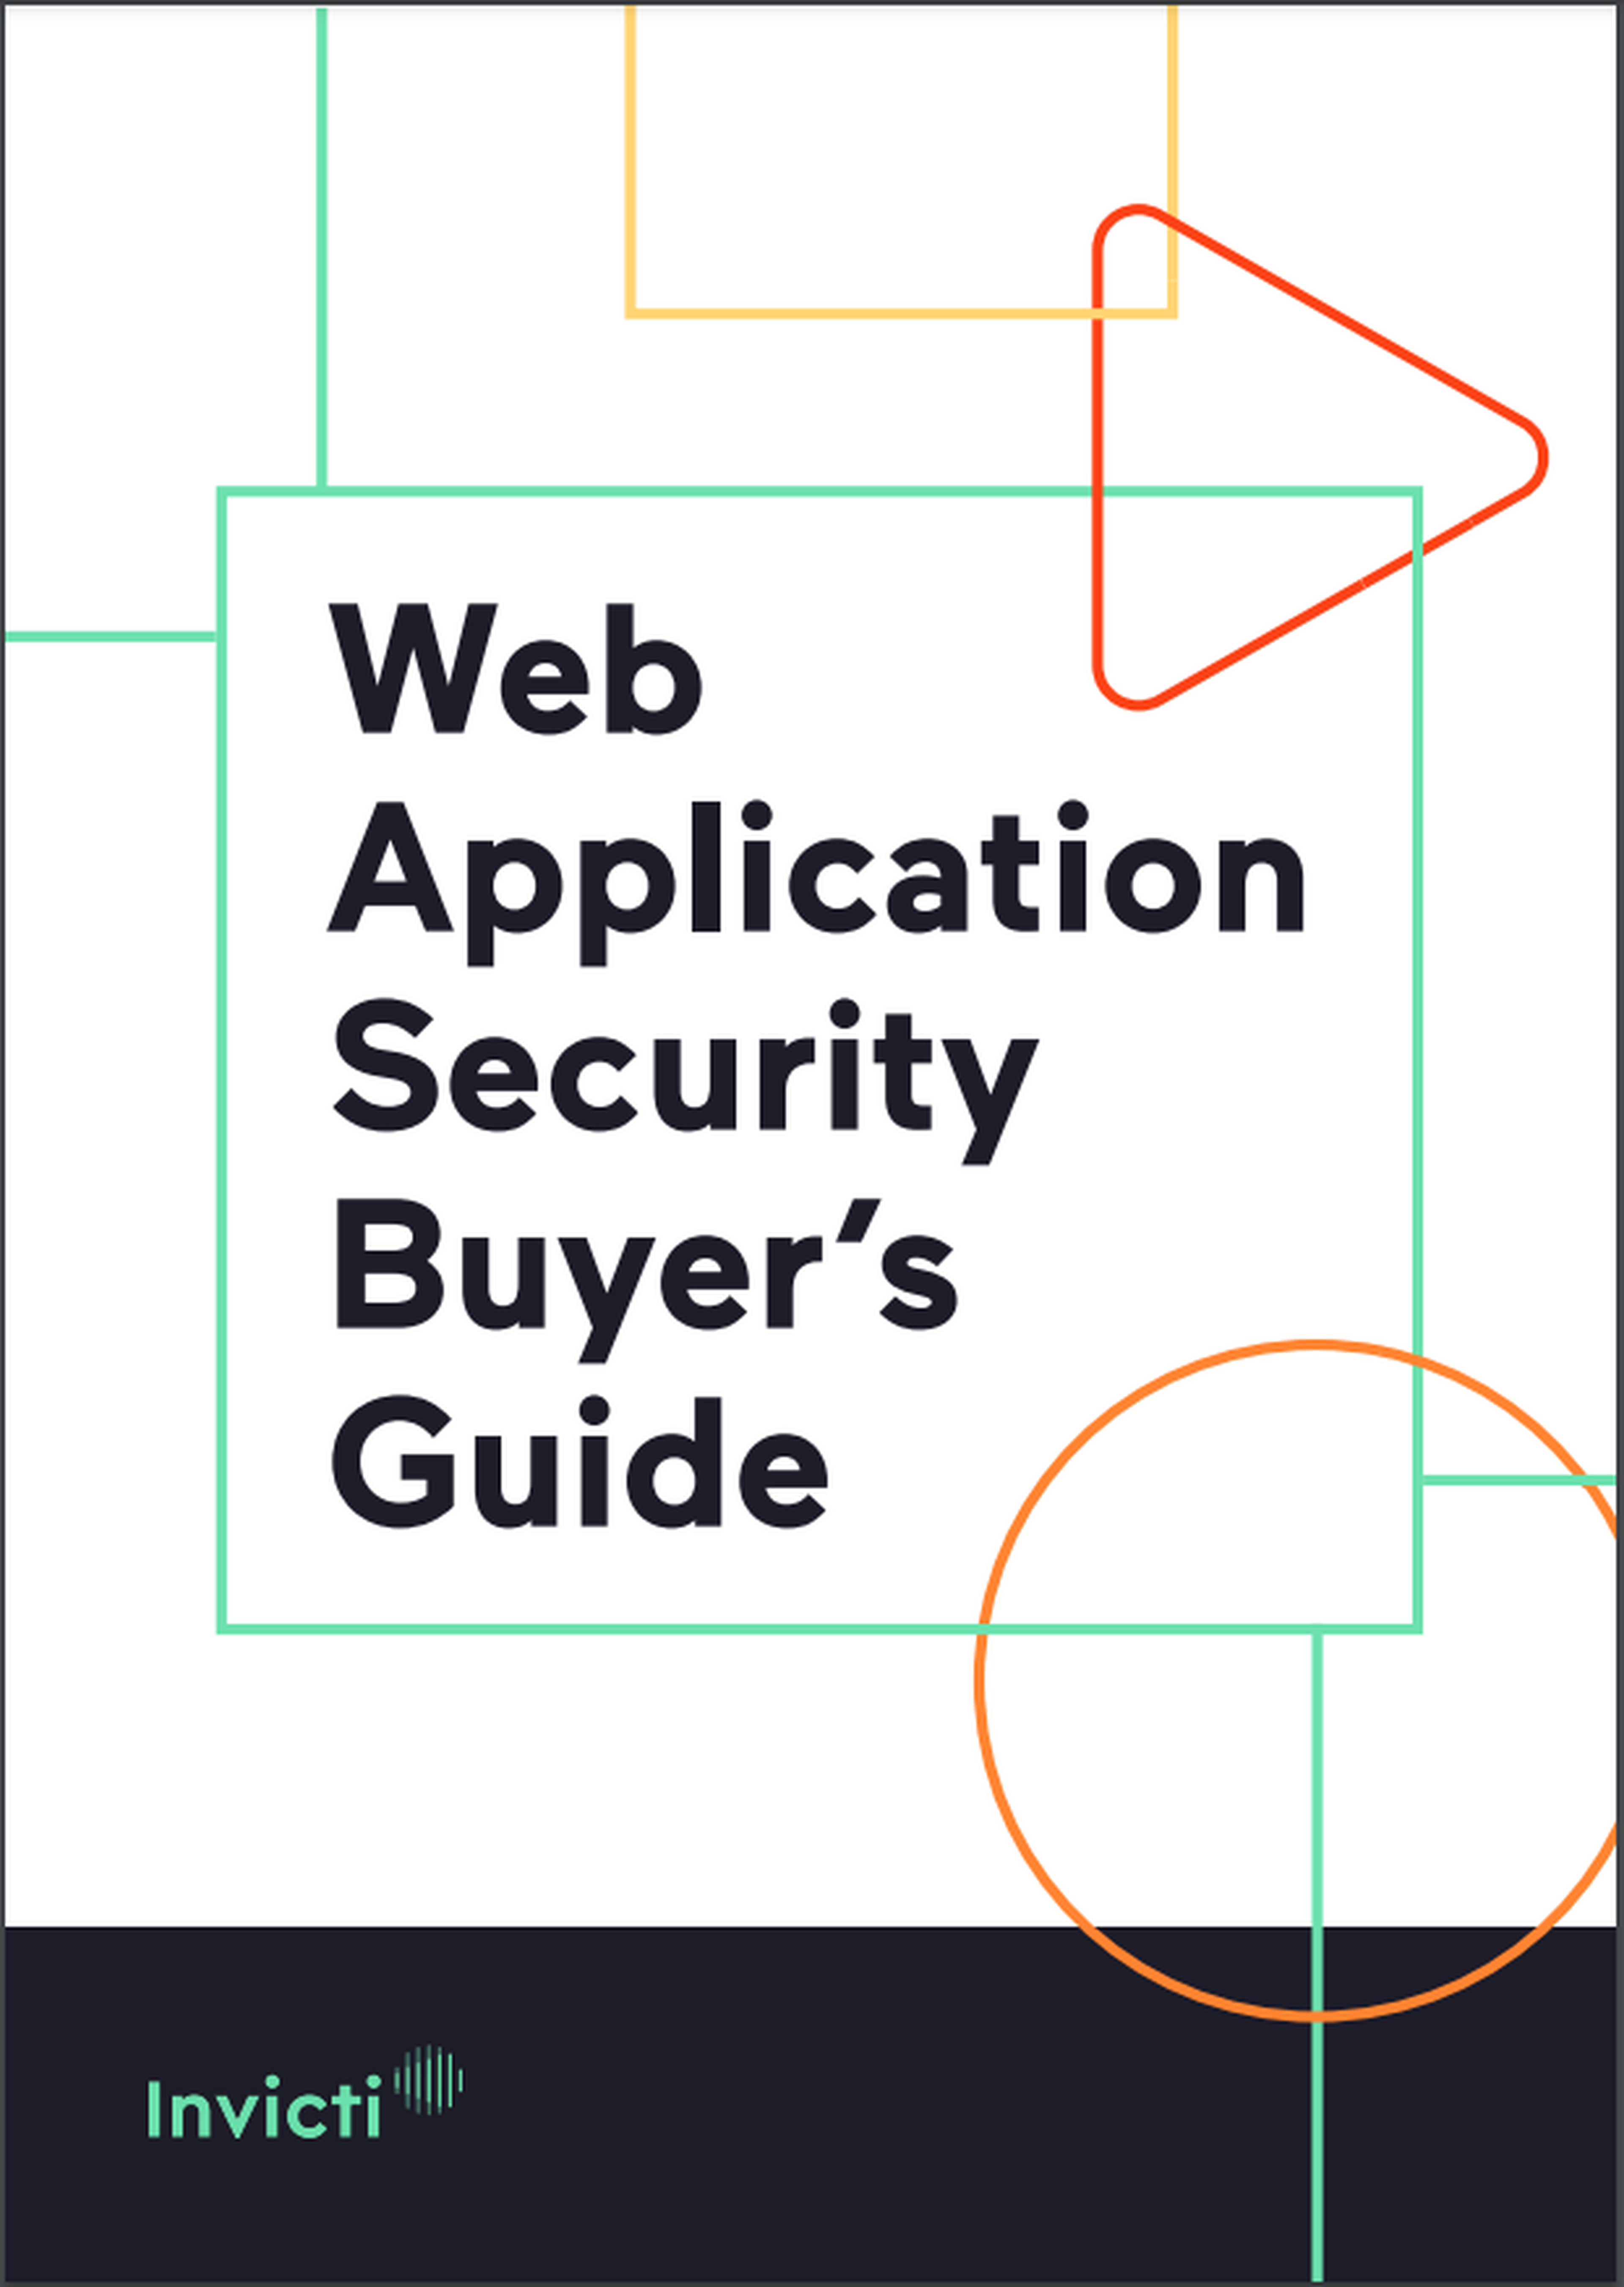 Web Application Security Buyer’s Guide